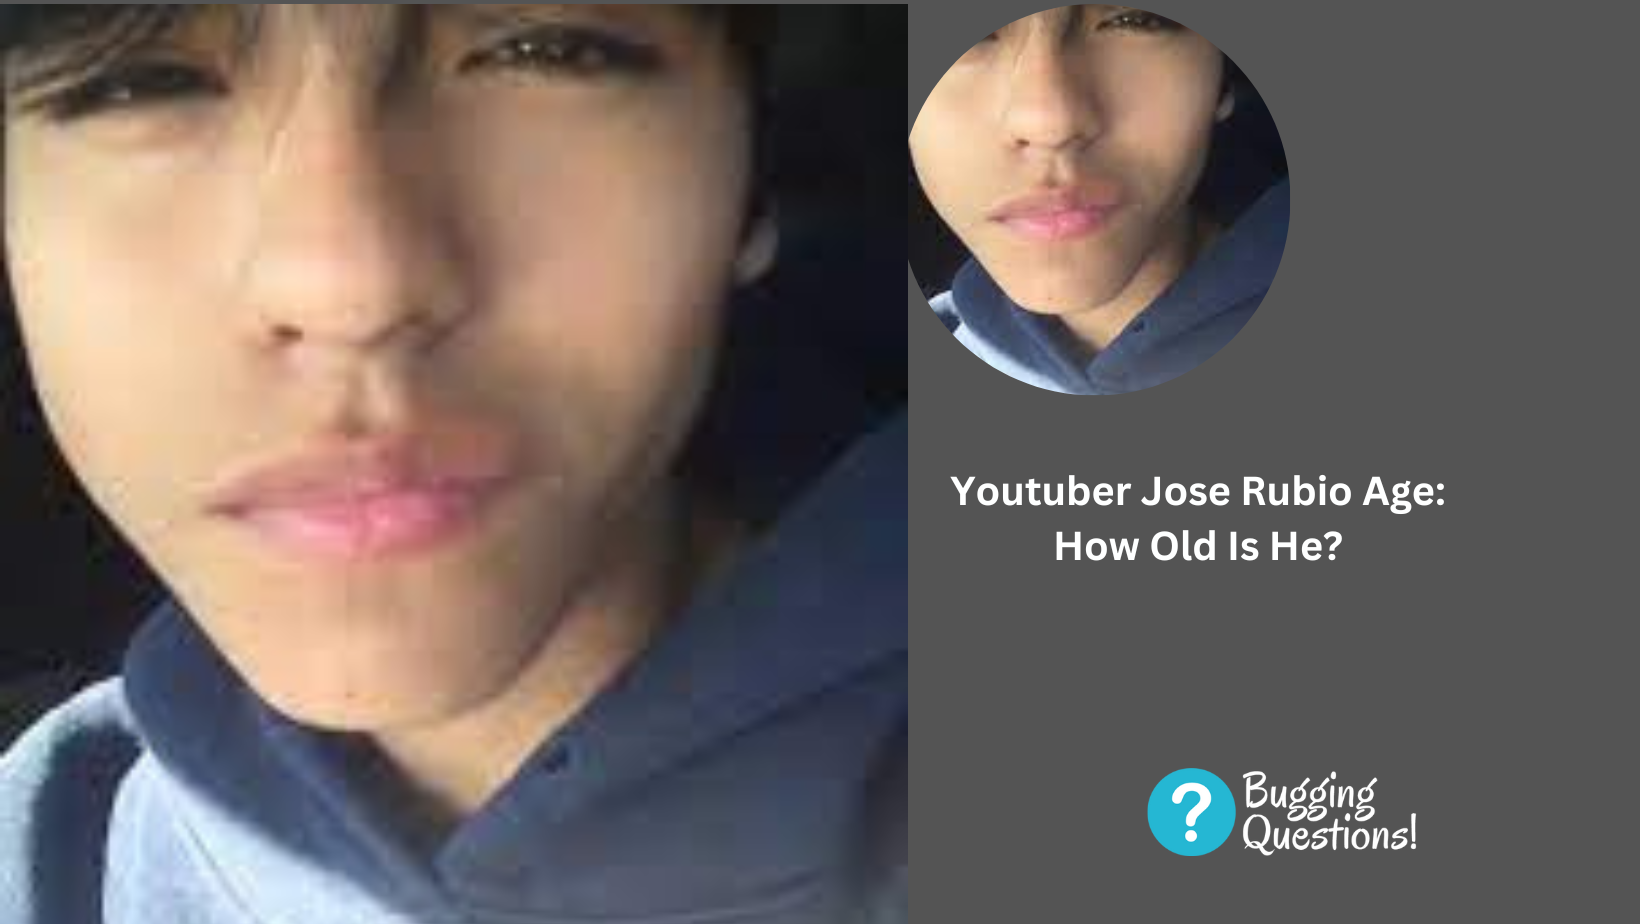 Youtuber Jose Rubio Age: How Old Is He?